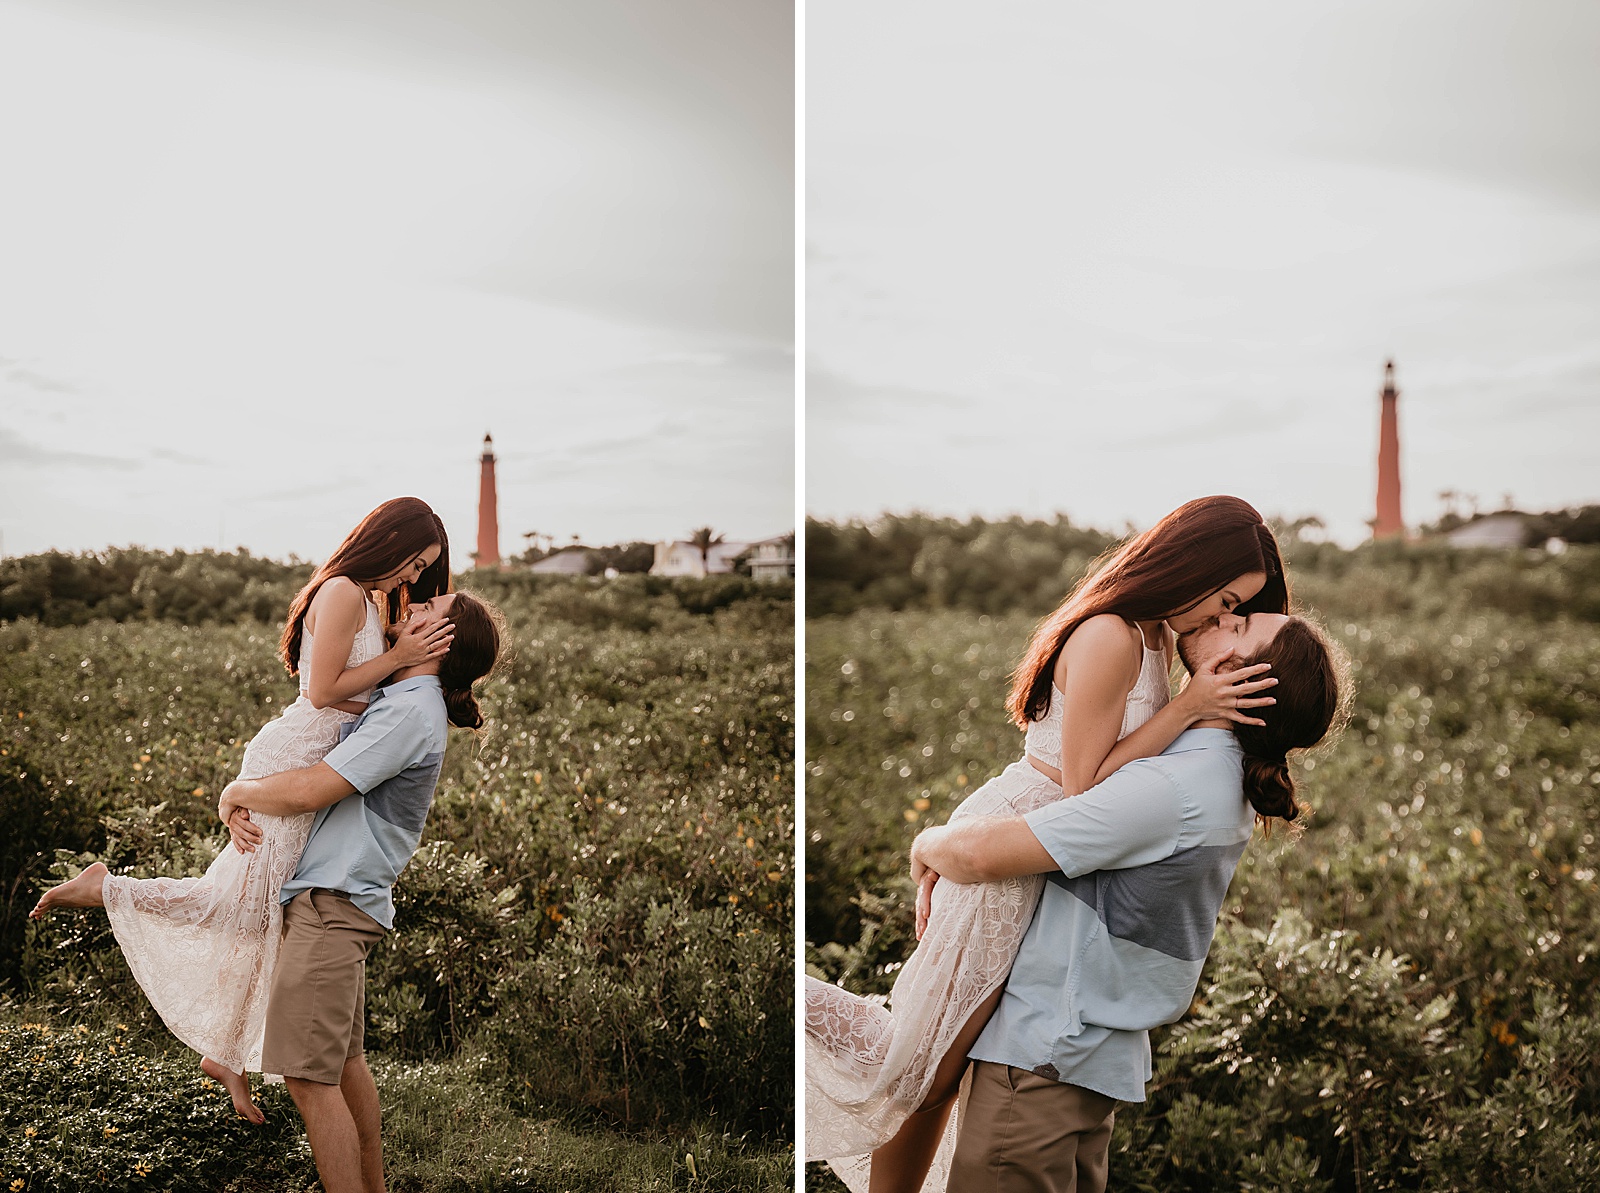 Ponce Inlet Engagement Photos captured by South Florida Engagement Photographer, Krystal Capone Photography